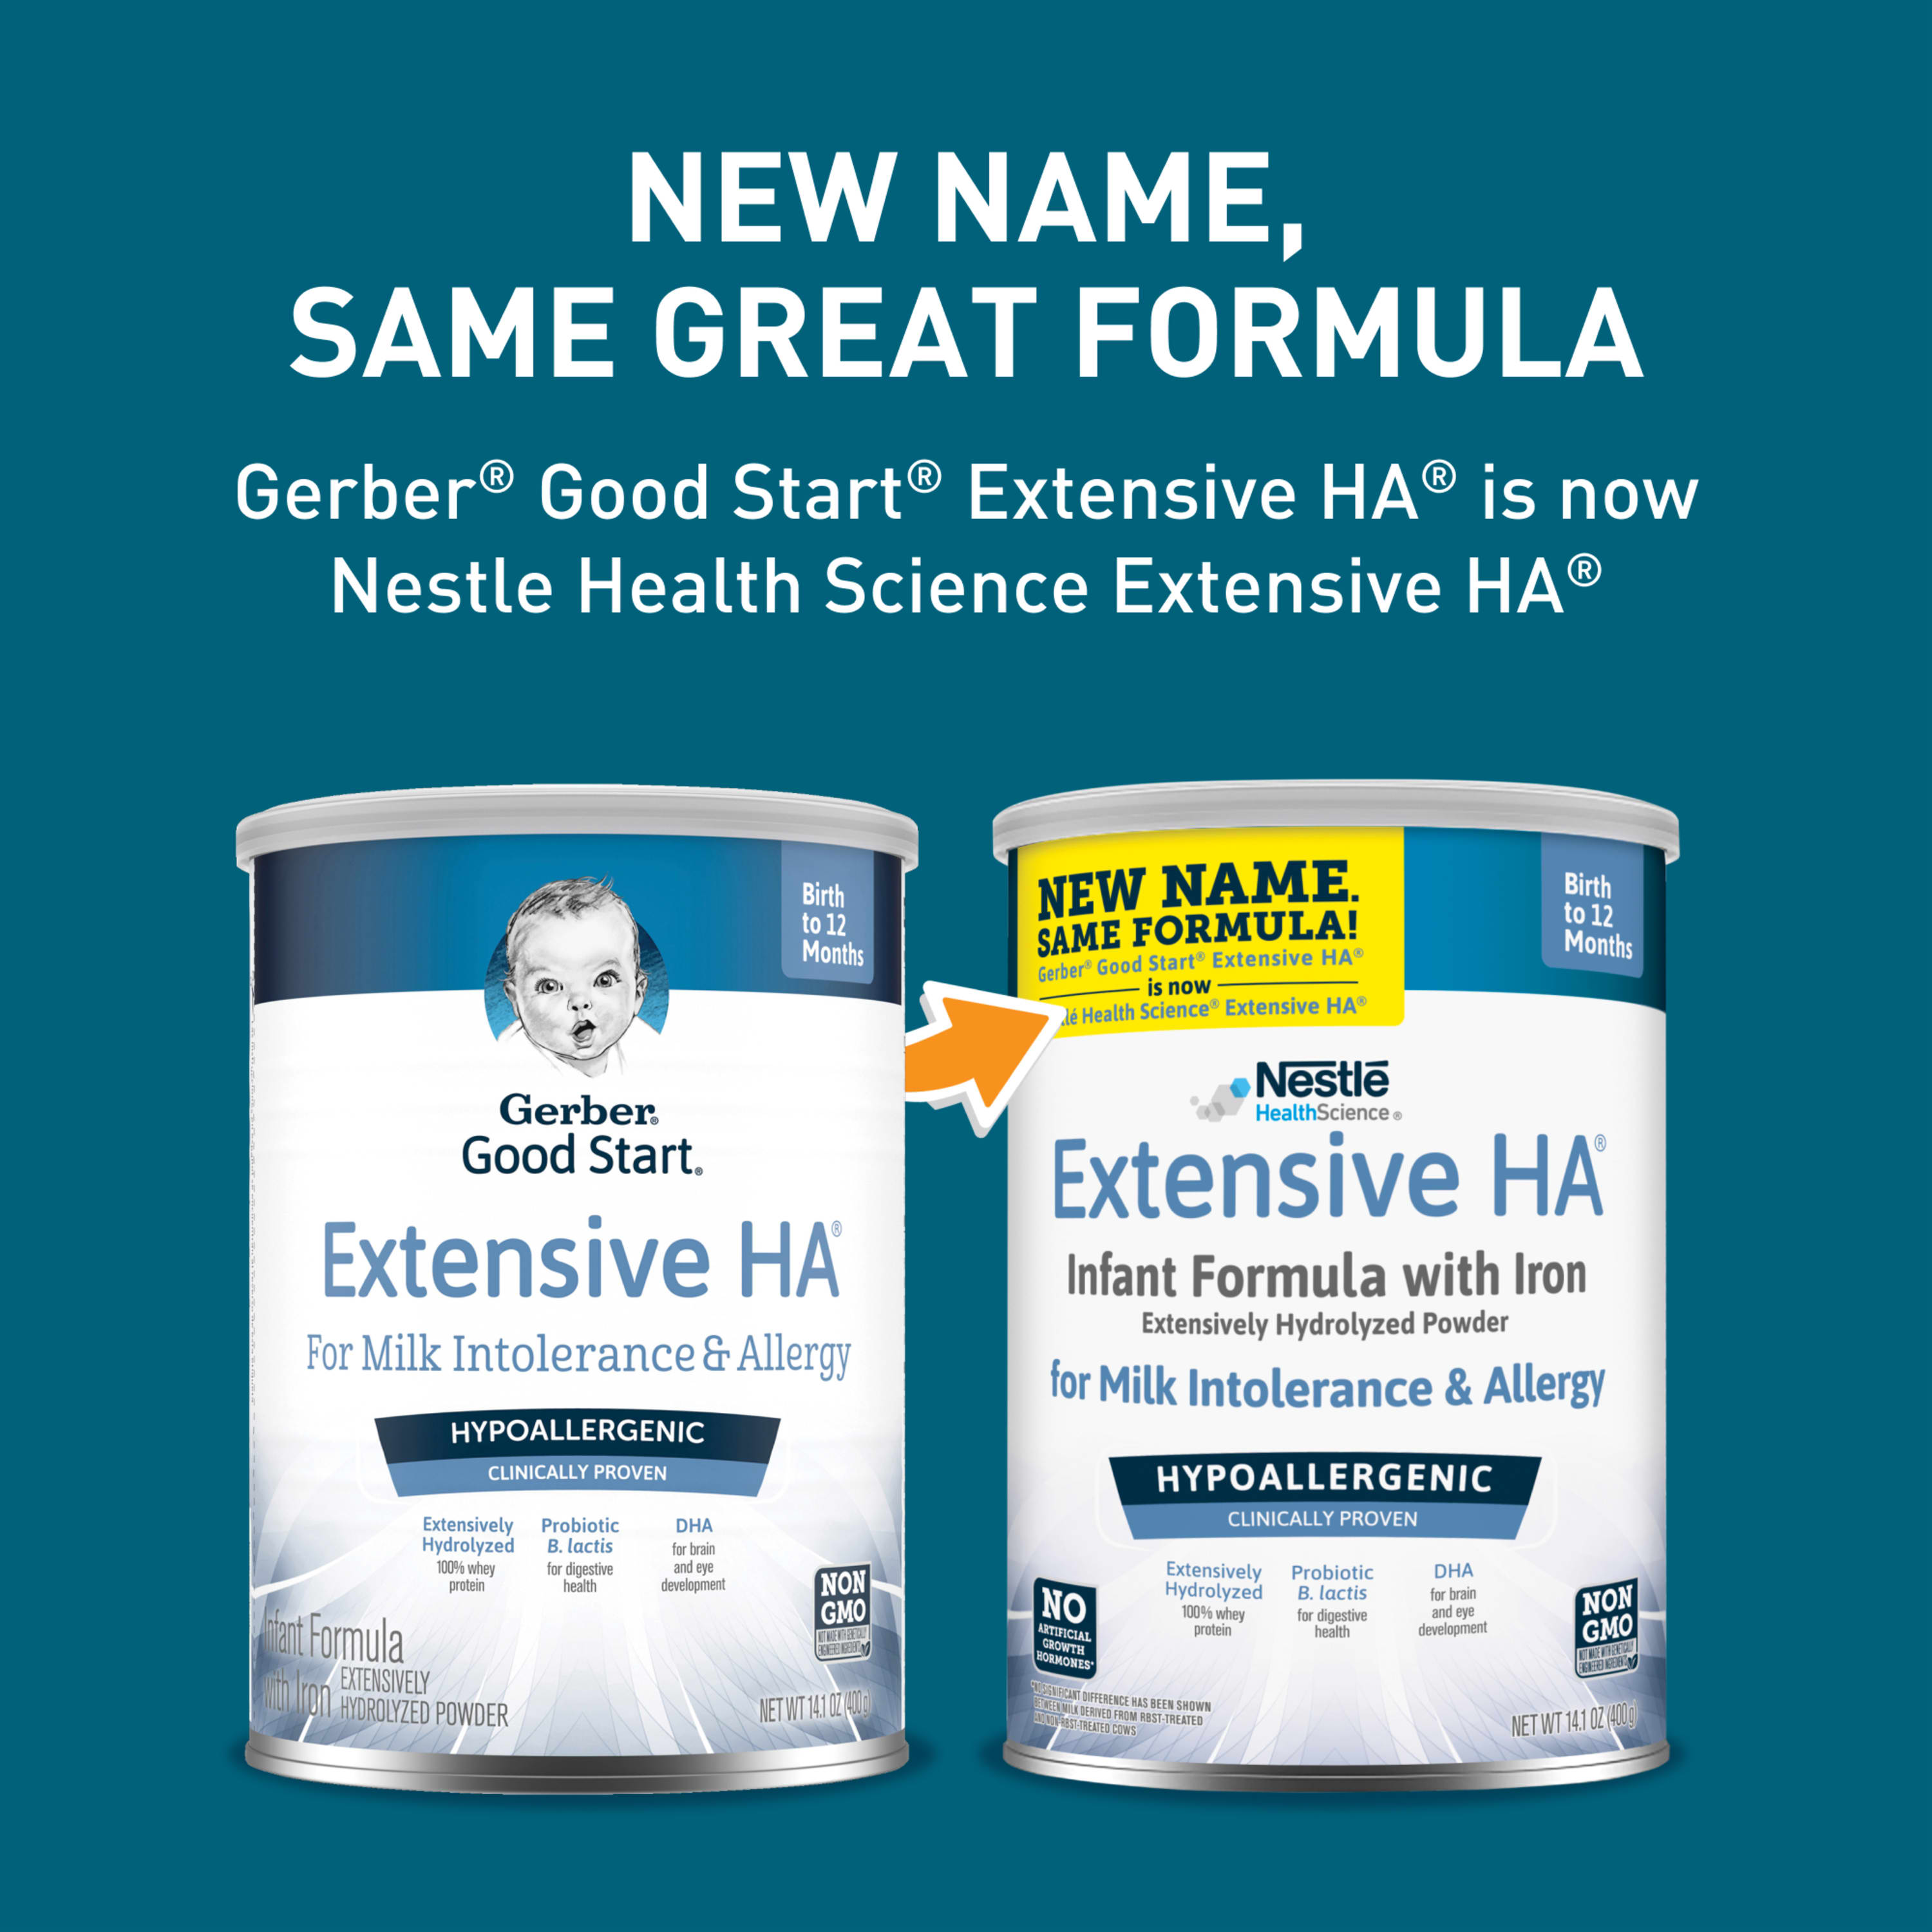 Extensive HA® Hypoallergenic Infant Formula With Iron, DHA & Probiotic, 14.1 oz Can (Packaging May Vary) - image 2 of 9